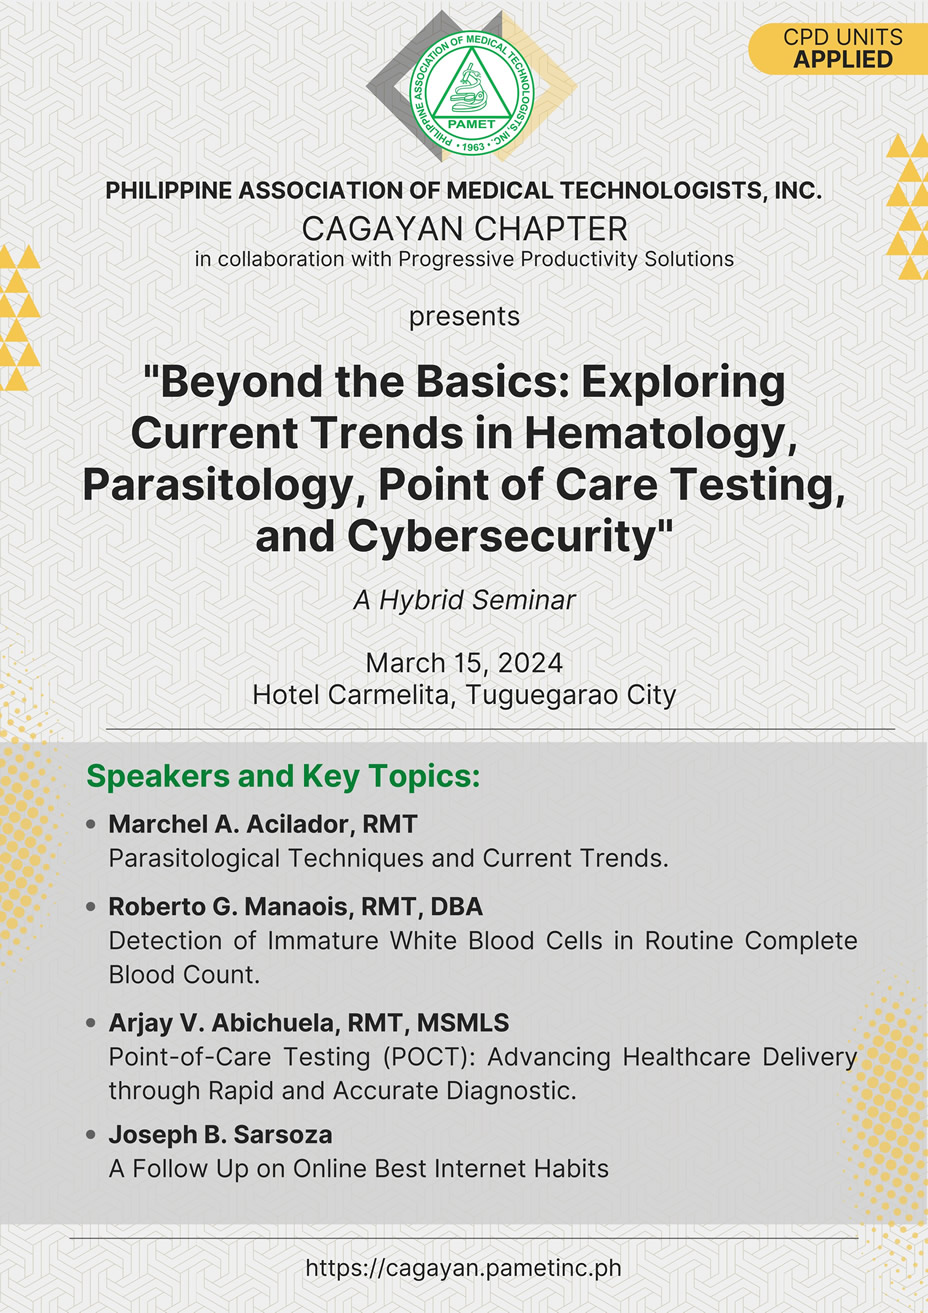 Beyond the Basics: Exploring Current Trends in Hematology, Parasitology, Point of Care Testing, and Cybersecurity